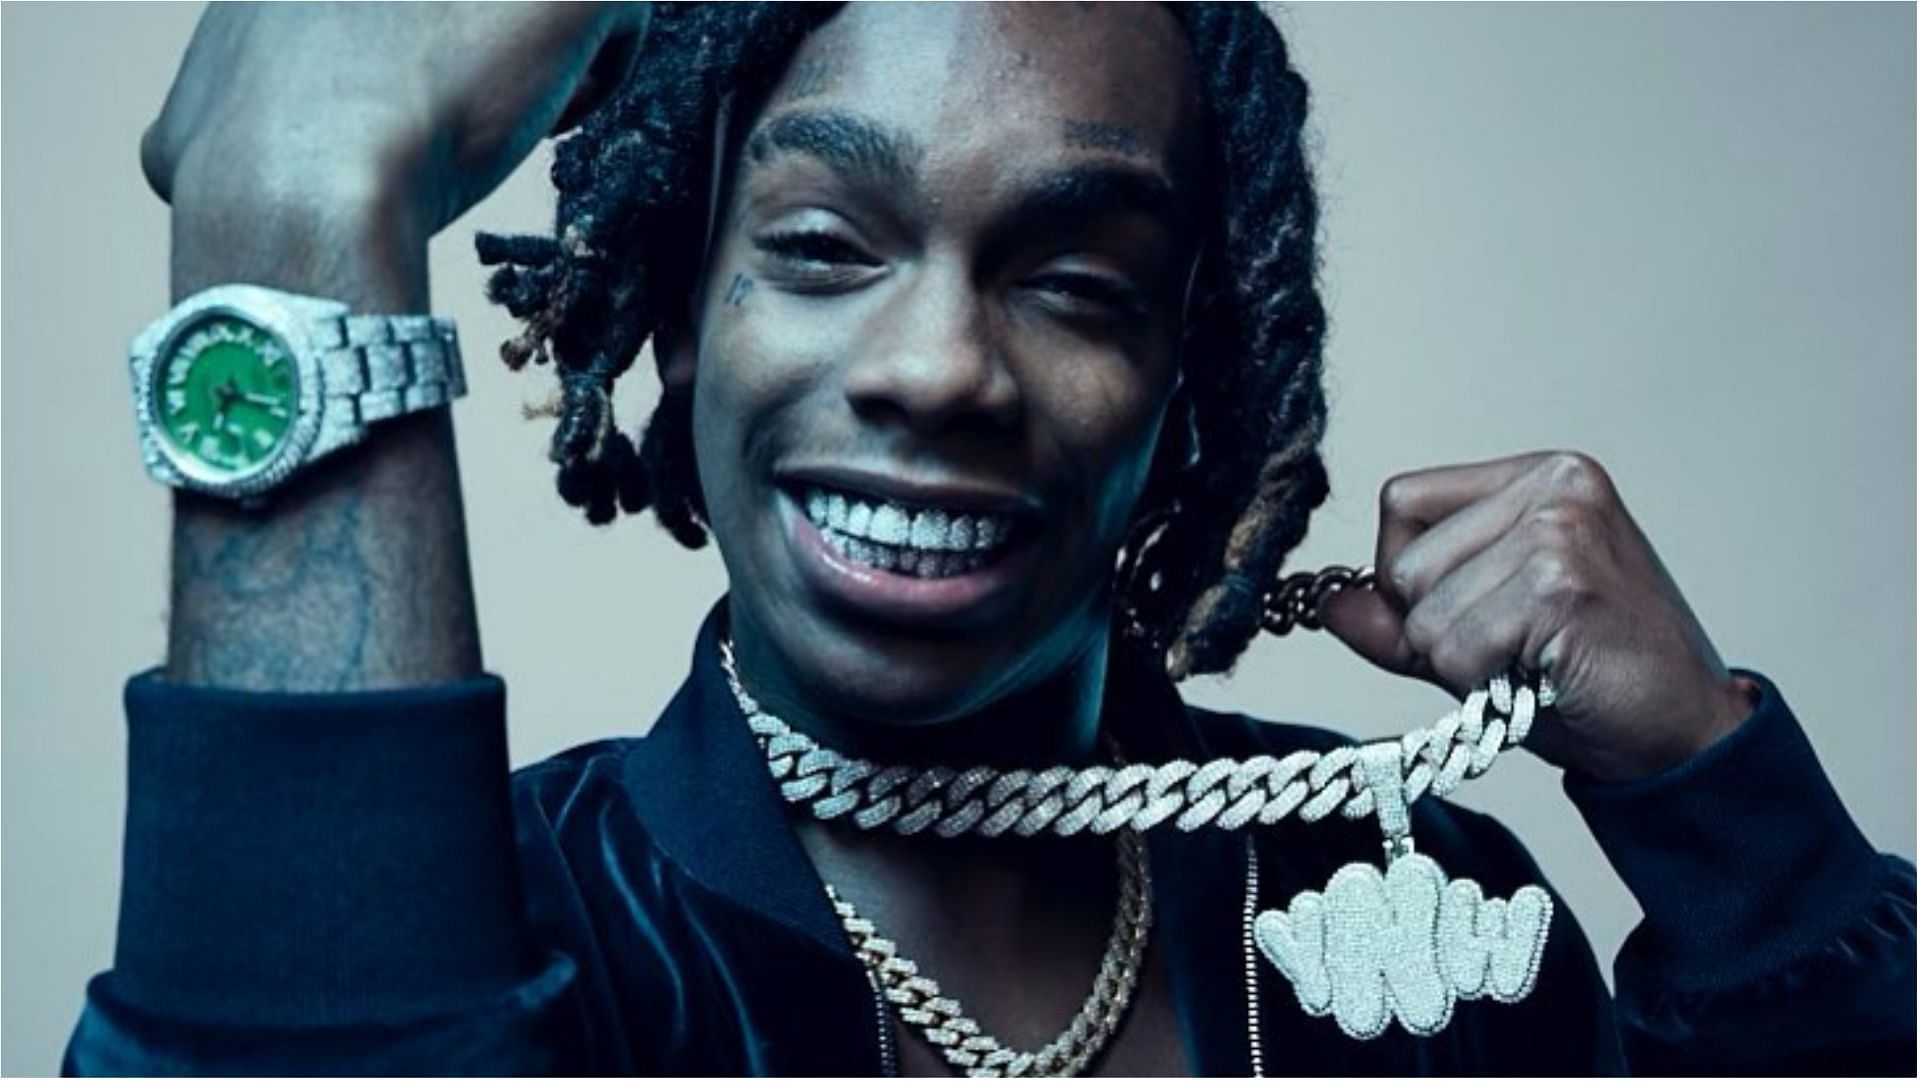 YNW Melly was arrested in 2019 along with YNW Bortlen on charges of murdering their friends (Image via ynwmelly/Instagram)